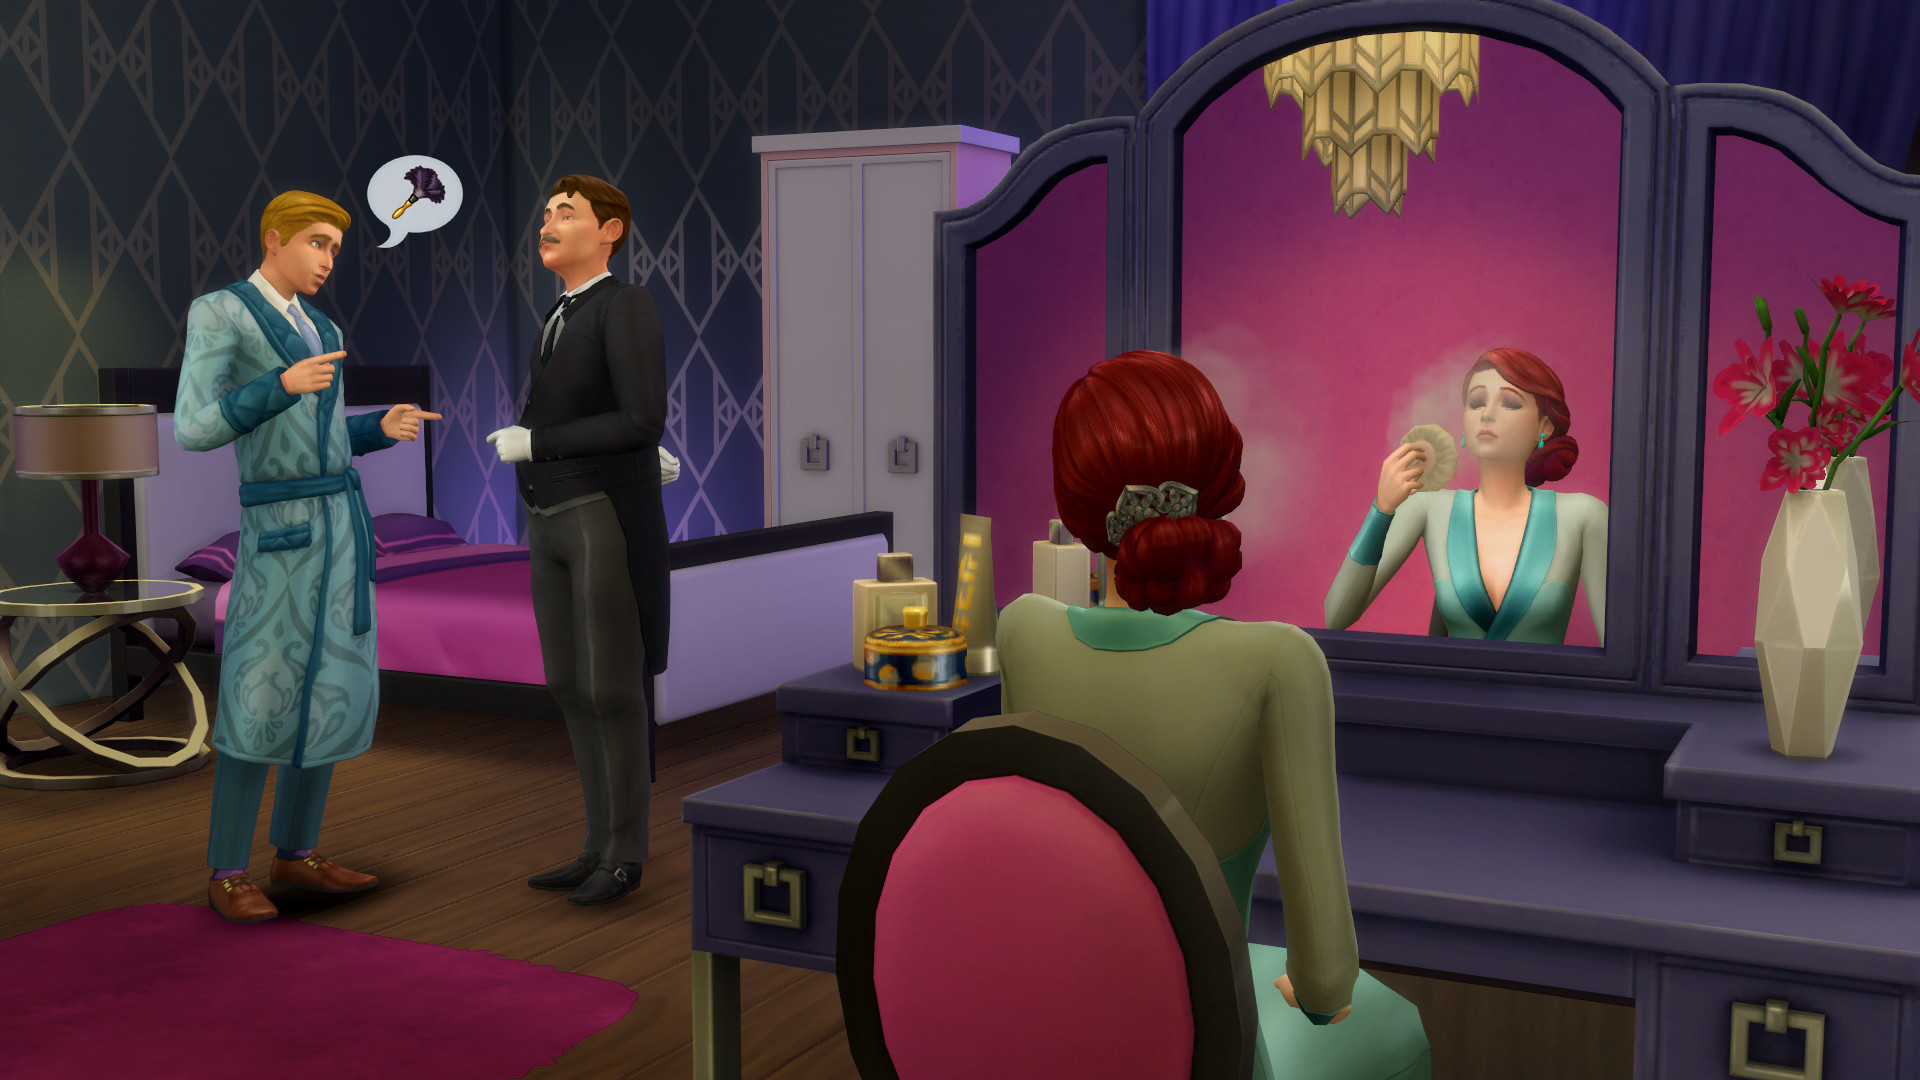 1920x1080 Community Blog: Go Classic With The Sims 4 Vintage Glamour Stuff Pack